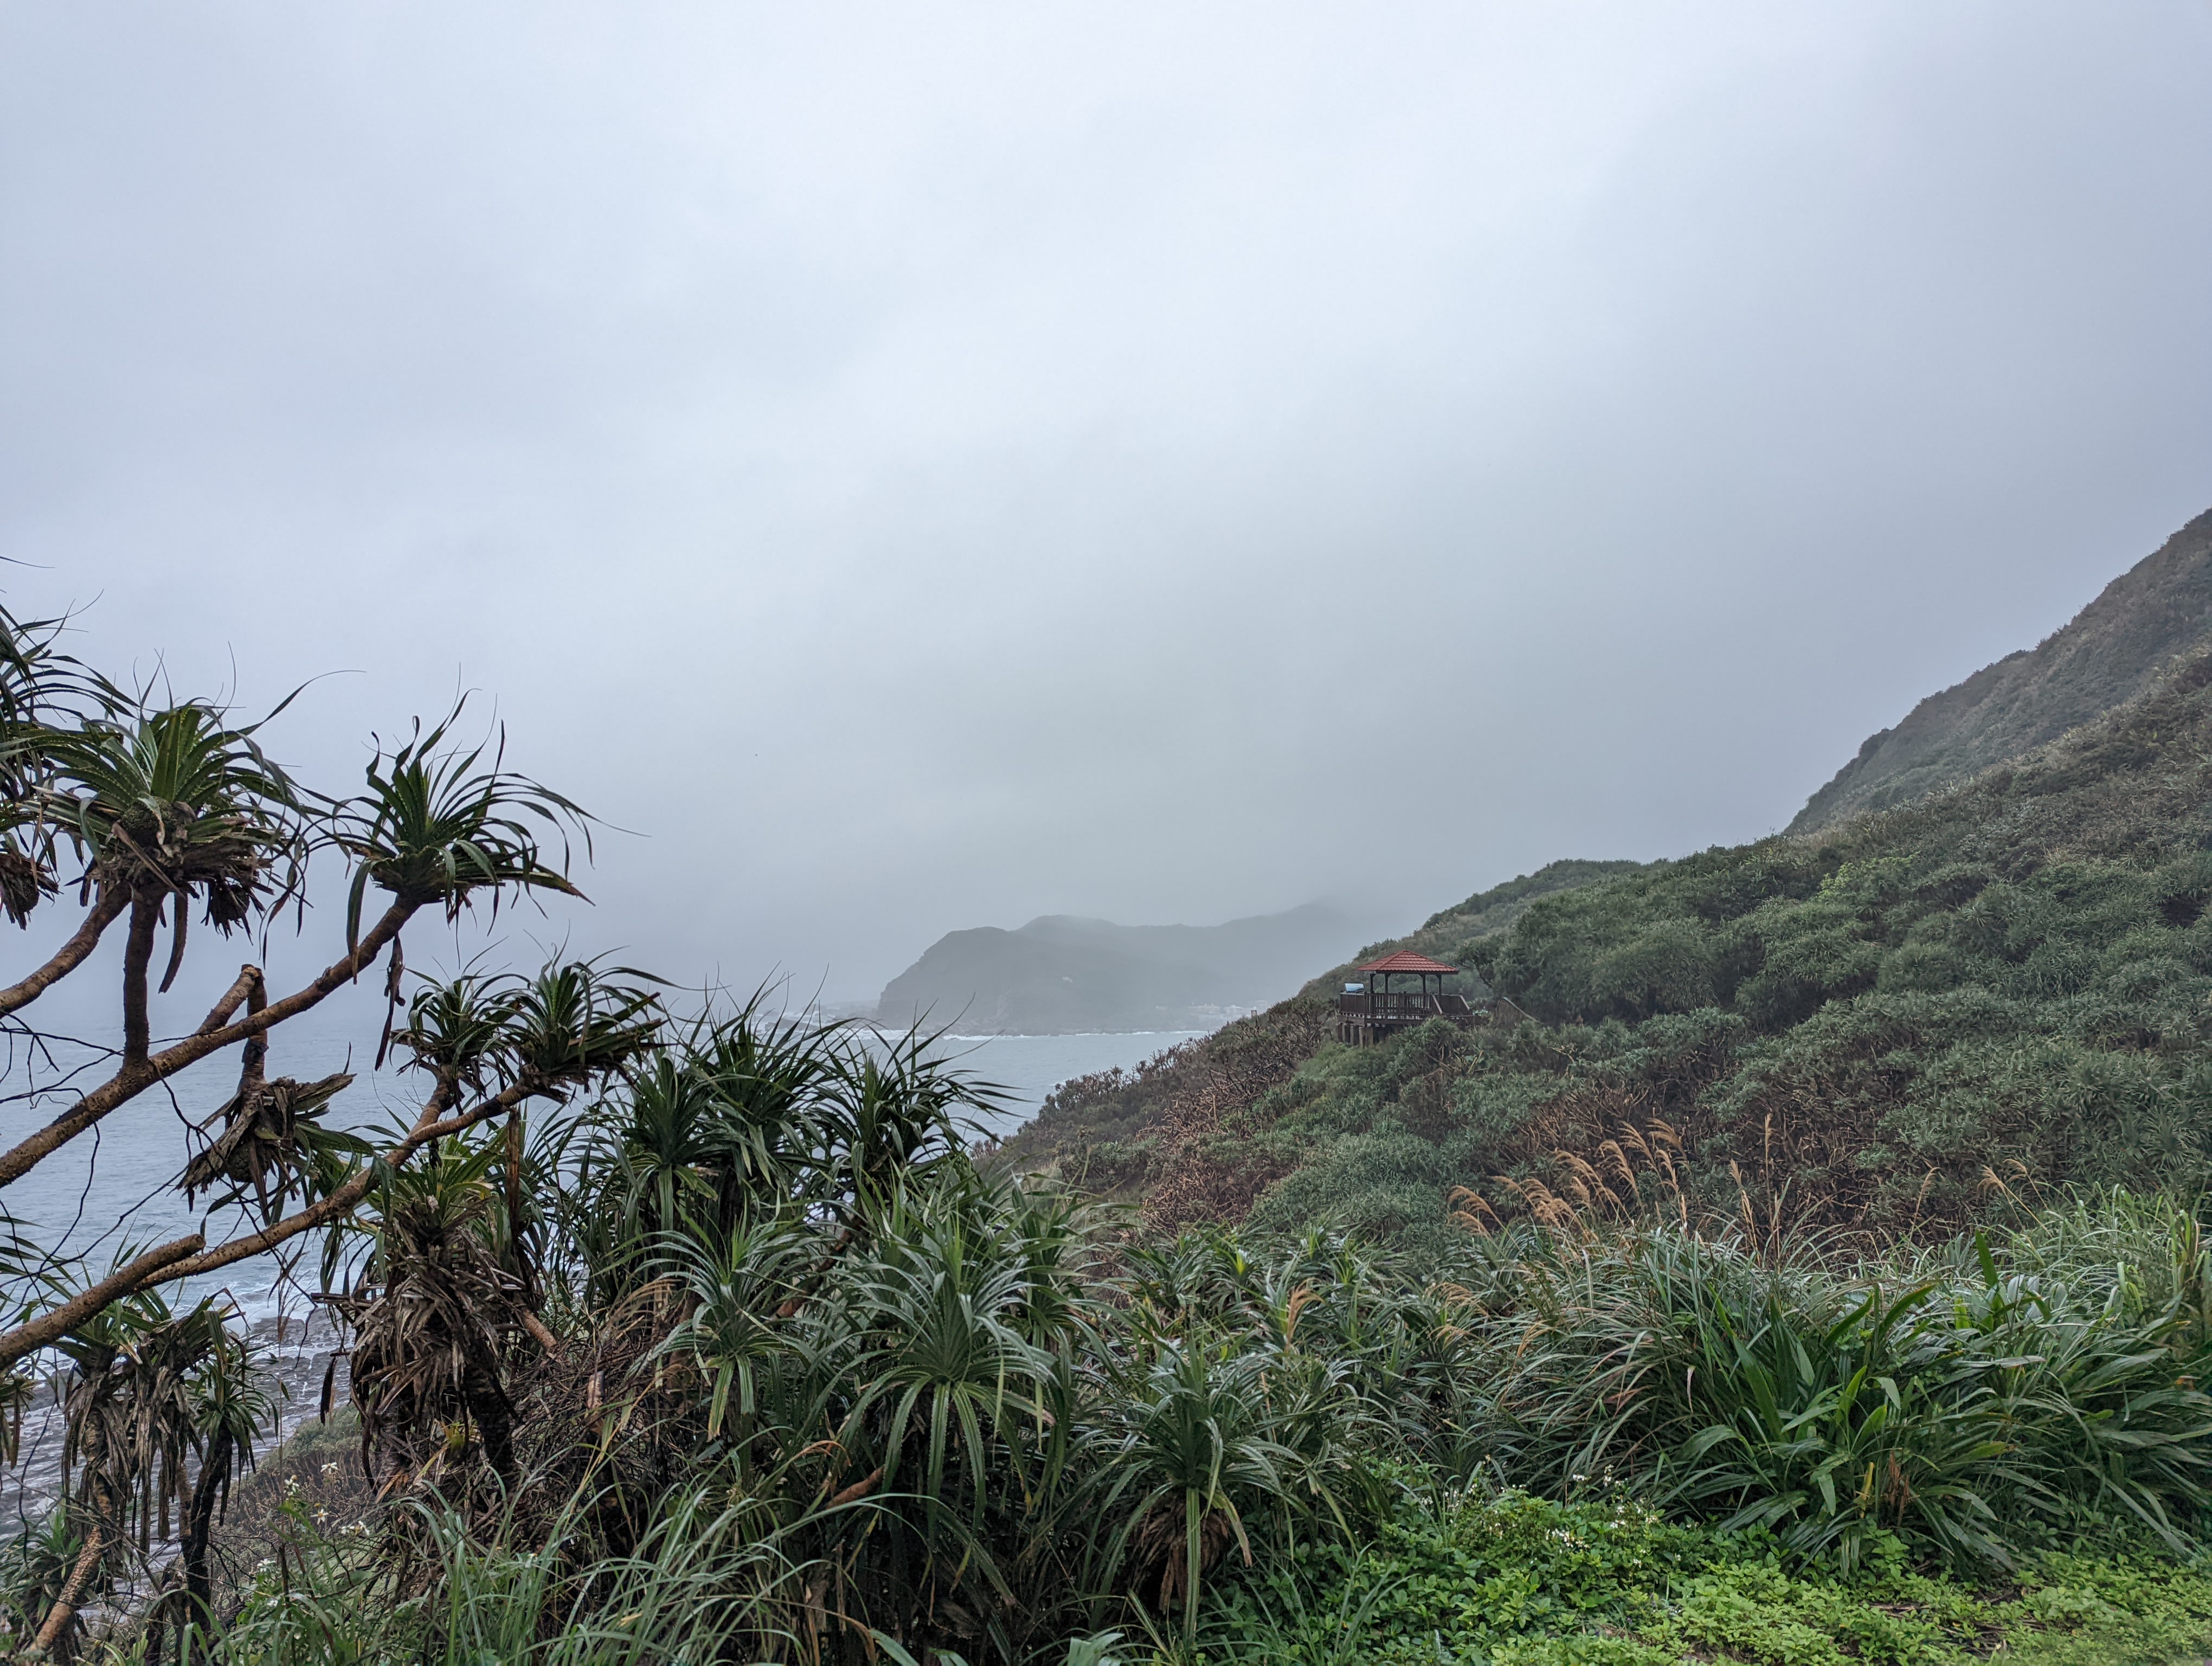 A photo of some green hills shrouded in fog and lush with foliage. There is ocean visible, and a small building nestled into the hillside.